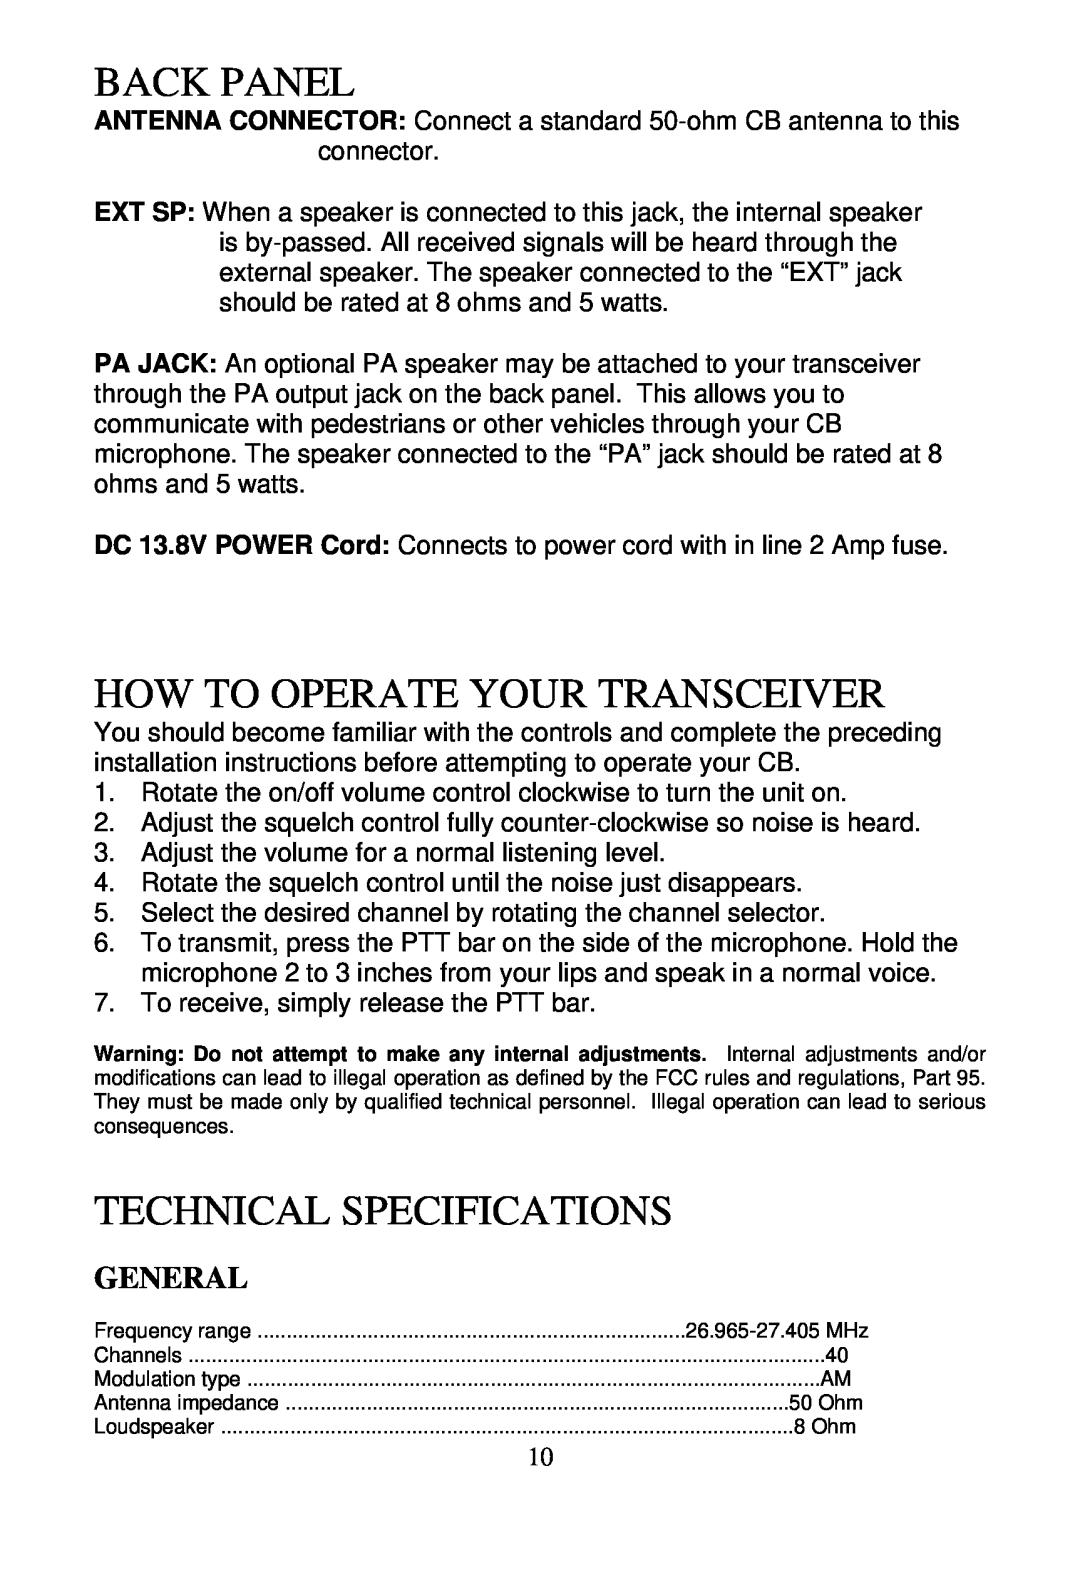 Midland Radio 1001z manual Back Panel, How To Operate Your Transceiver, Technical Specifications, General 